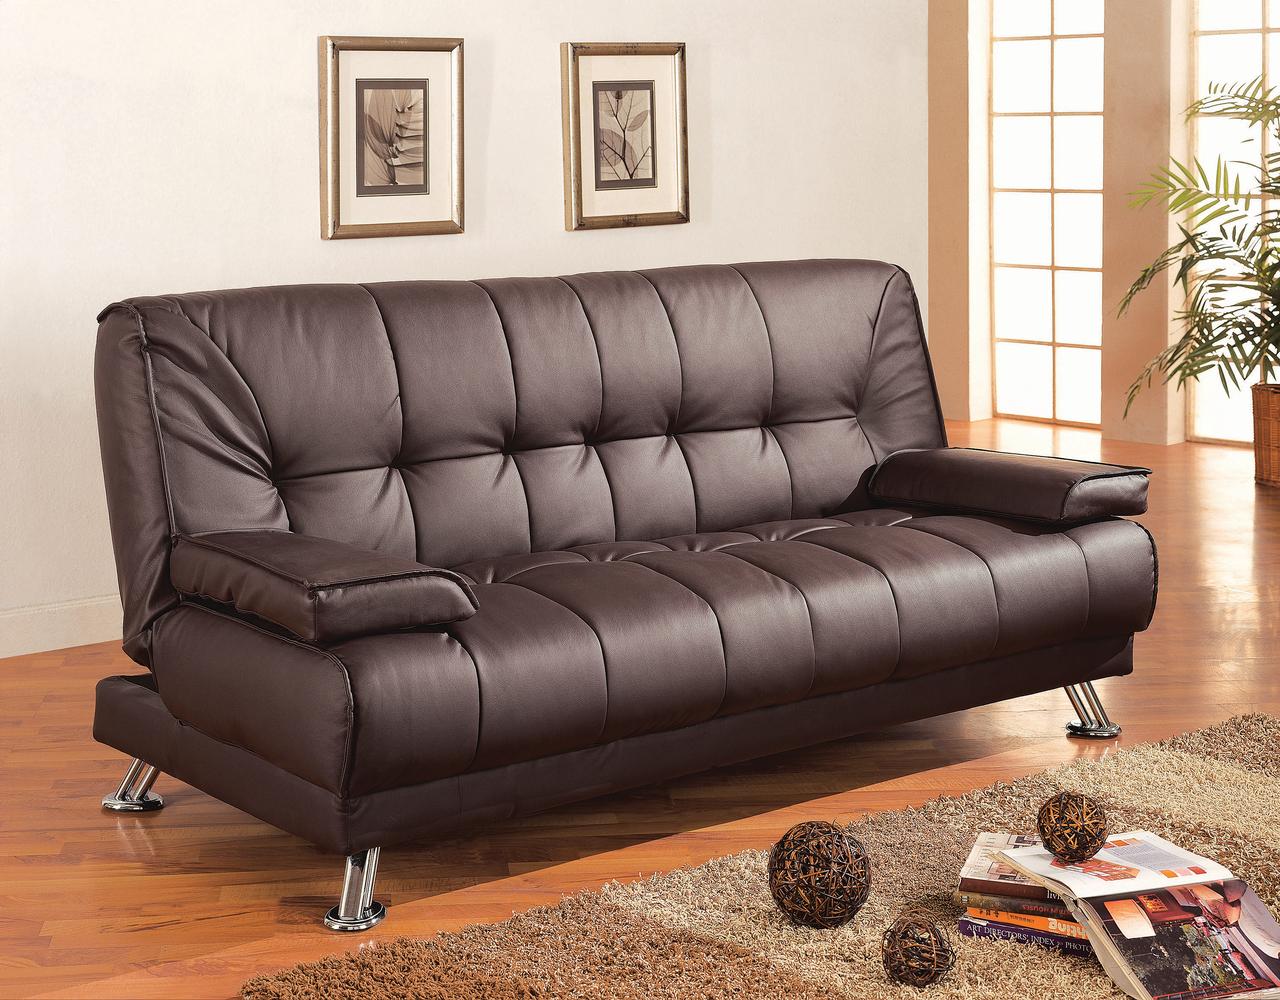 Braxton Leatherette Sofa Bed, Brown - image 1 of 4